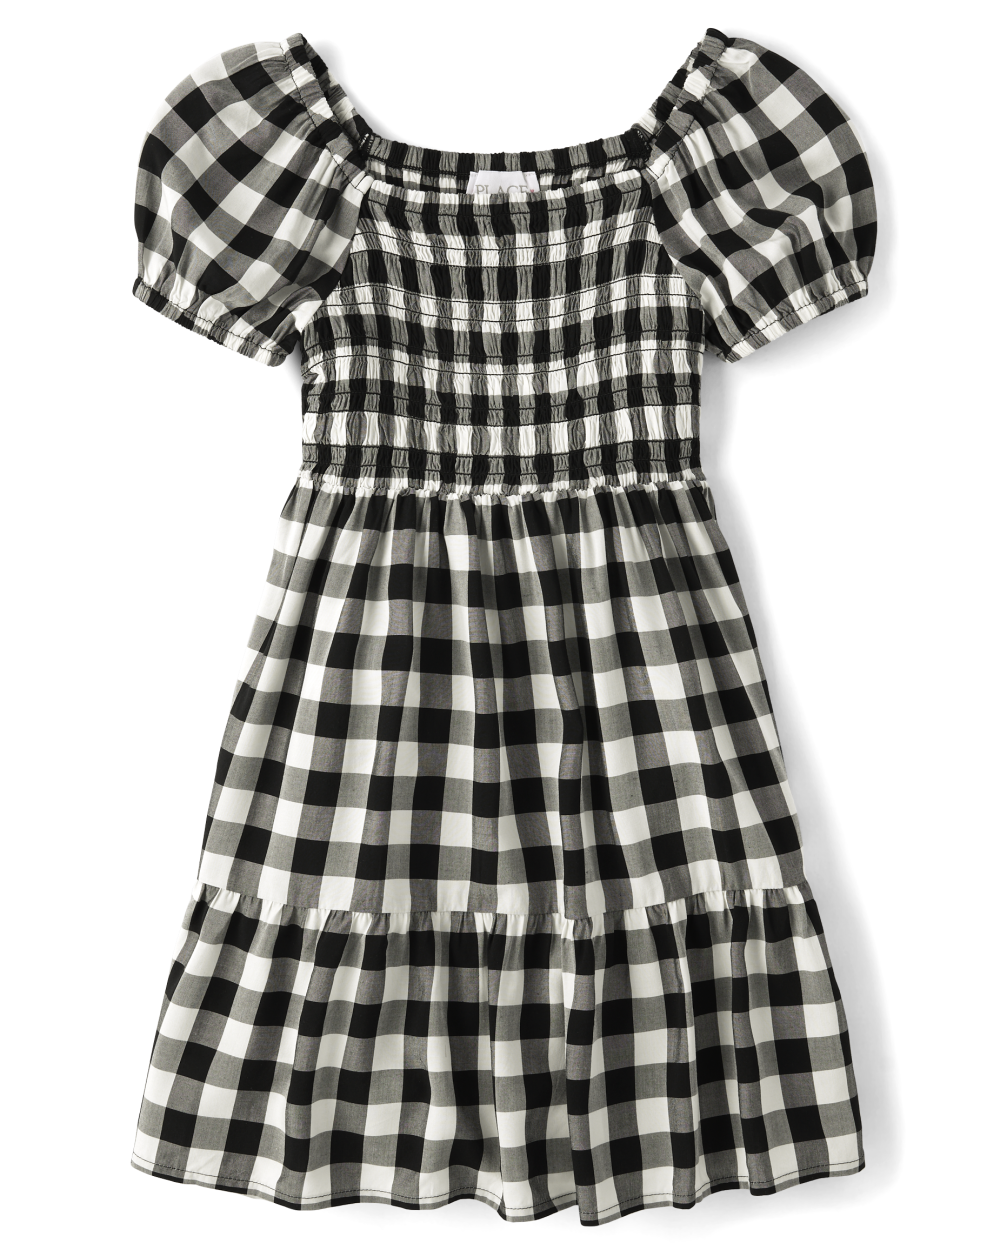 Girls Puff Sleeves Short Sleeves Sleeves Rayon Above the Knee Smocked Square Neck Checkered Gingham Print Dress With Ruffles